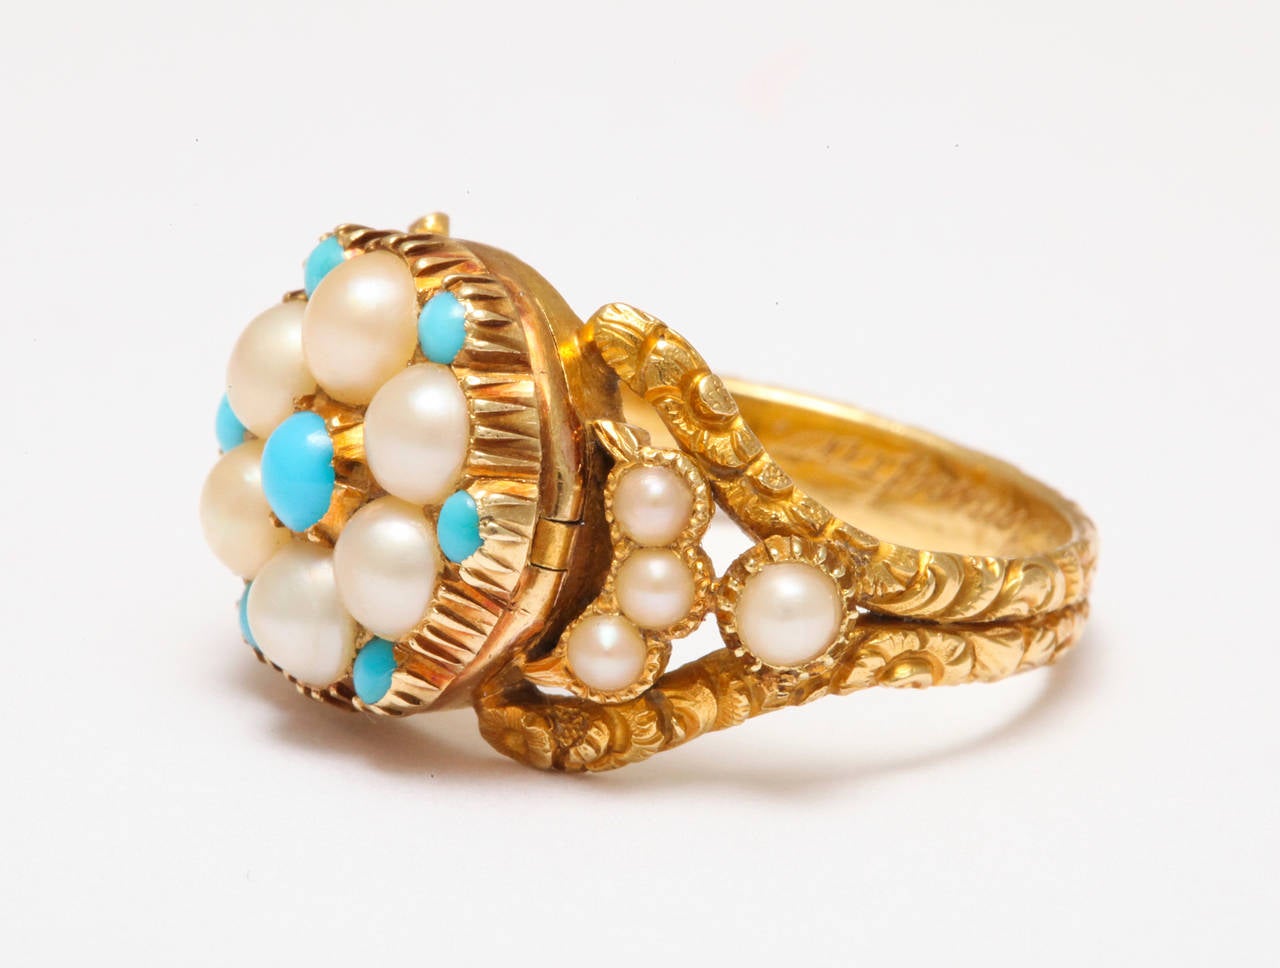 A high carat gold Georgian gem of a ring in which the  engraving, the hand made setting, and the  glow of the turquoise and pearl gems are all  extraordinary. Locket rings from the early nineteenth century are rare indeed. We felt  extremely